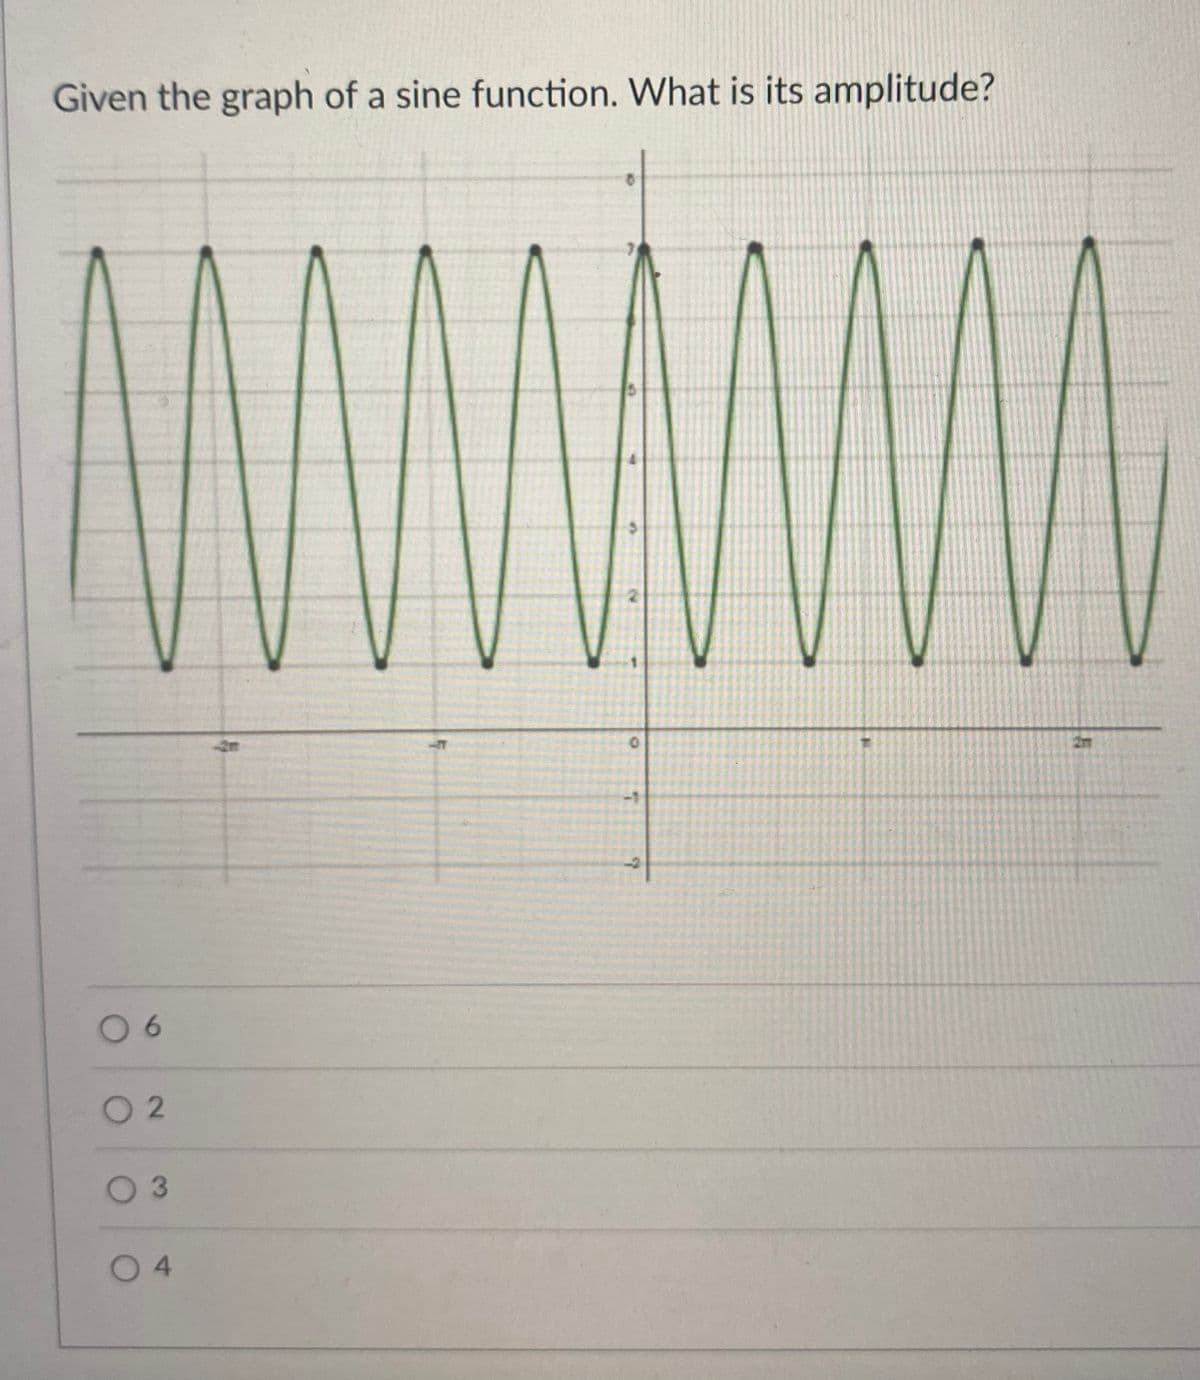 Given the graph of a sine function. What is its amplitude?
27
6.
O 2
0 3
O 4
